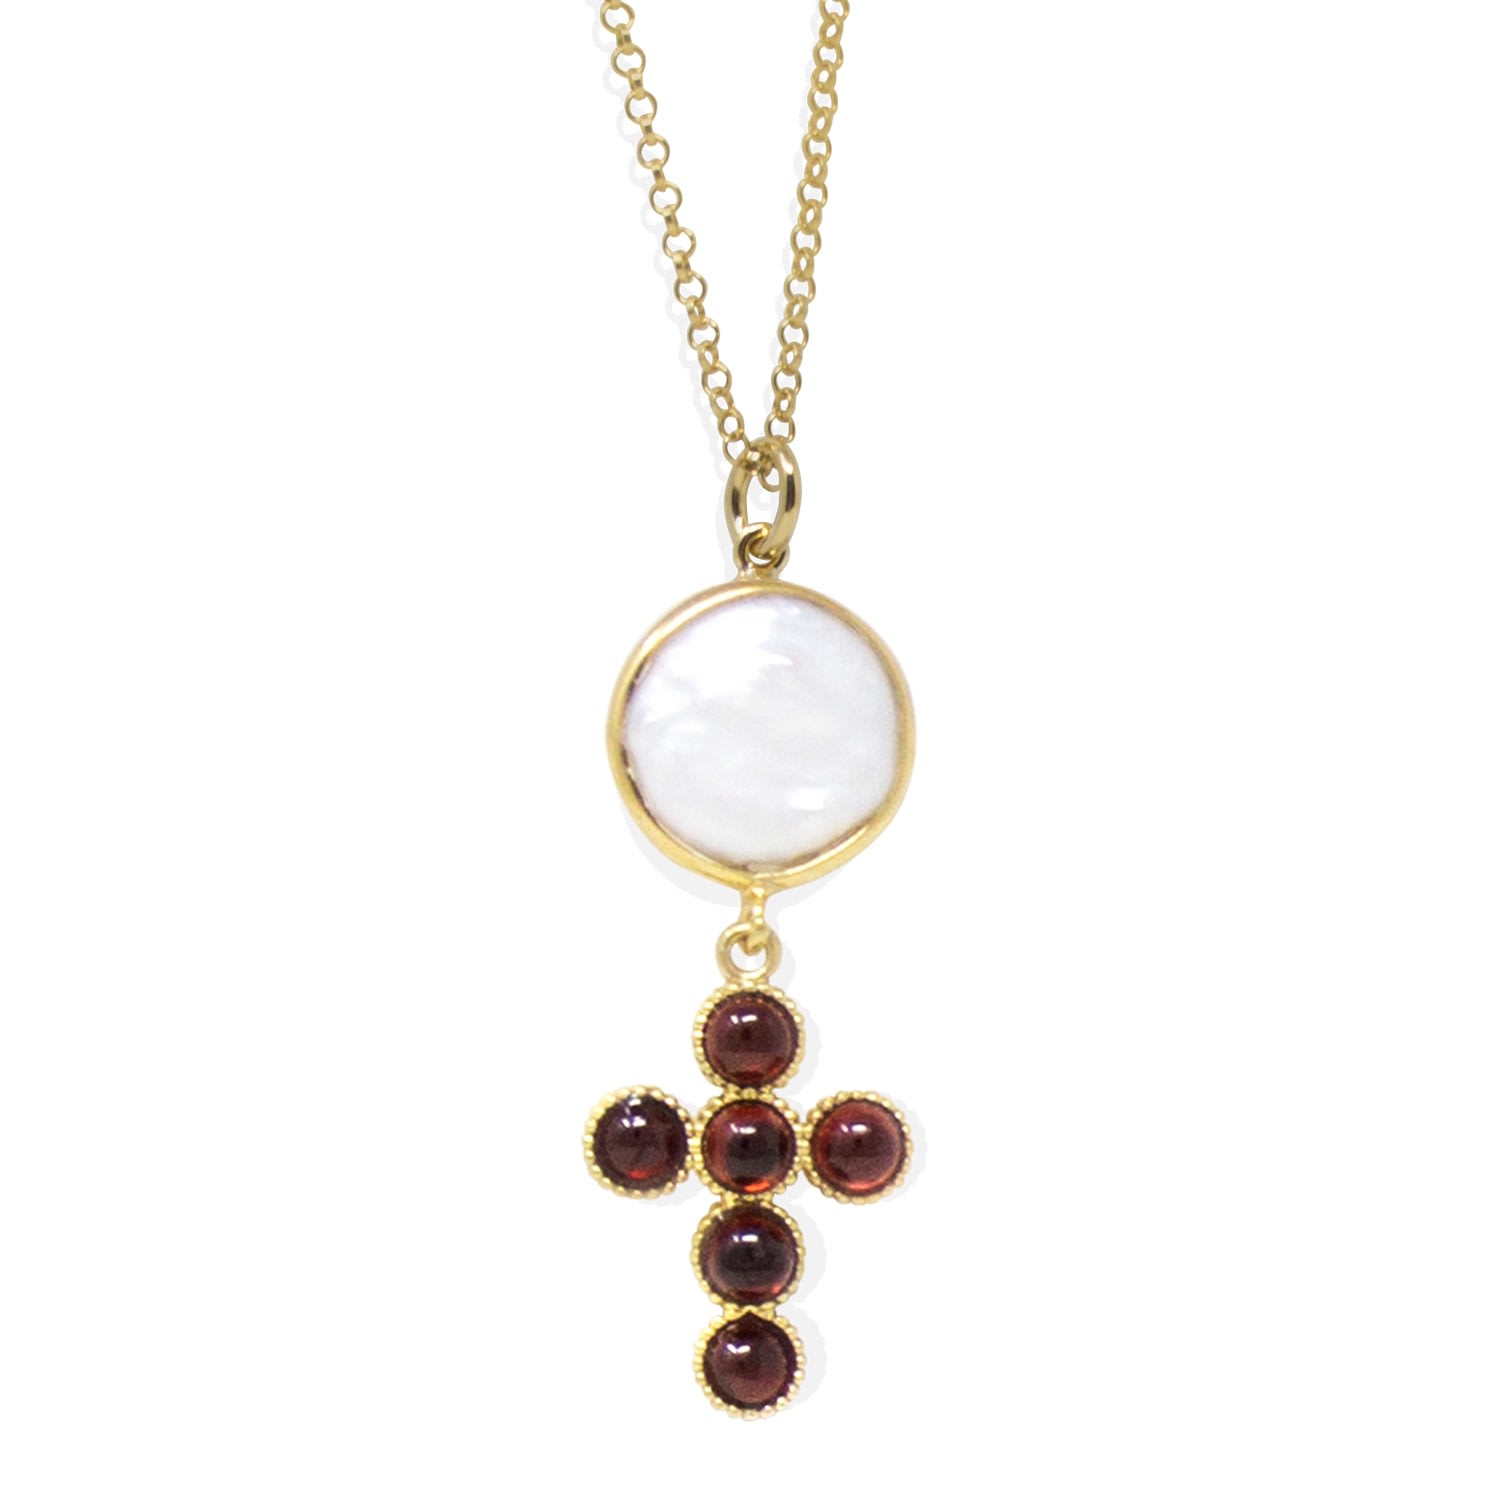 Vintouch Italy Women's Red Hope Gold-plated Garnet Cross Necklace